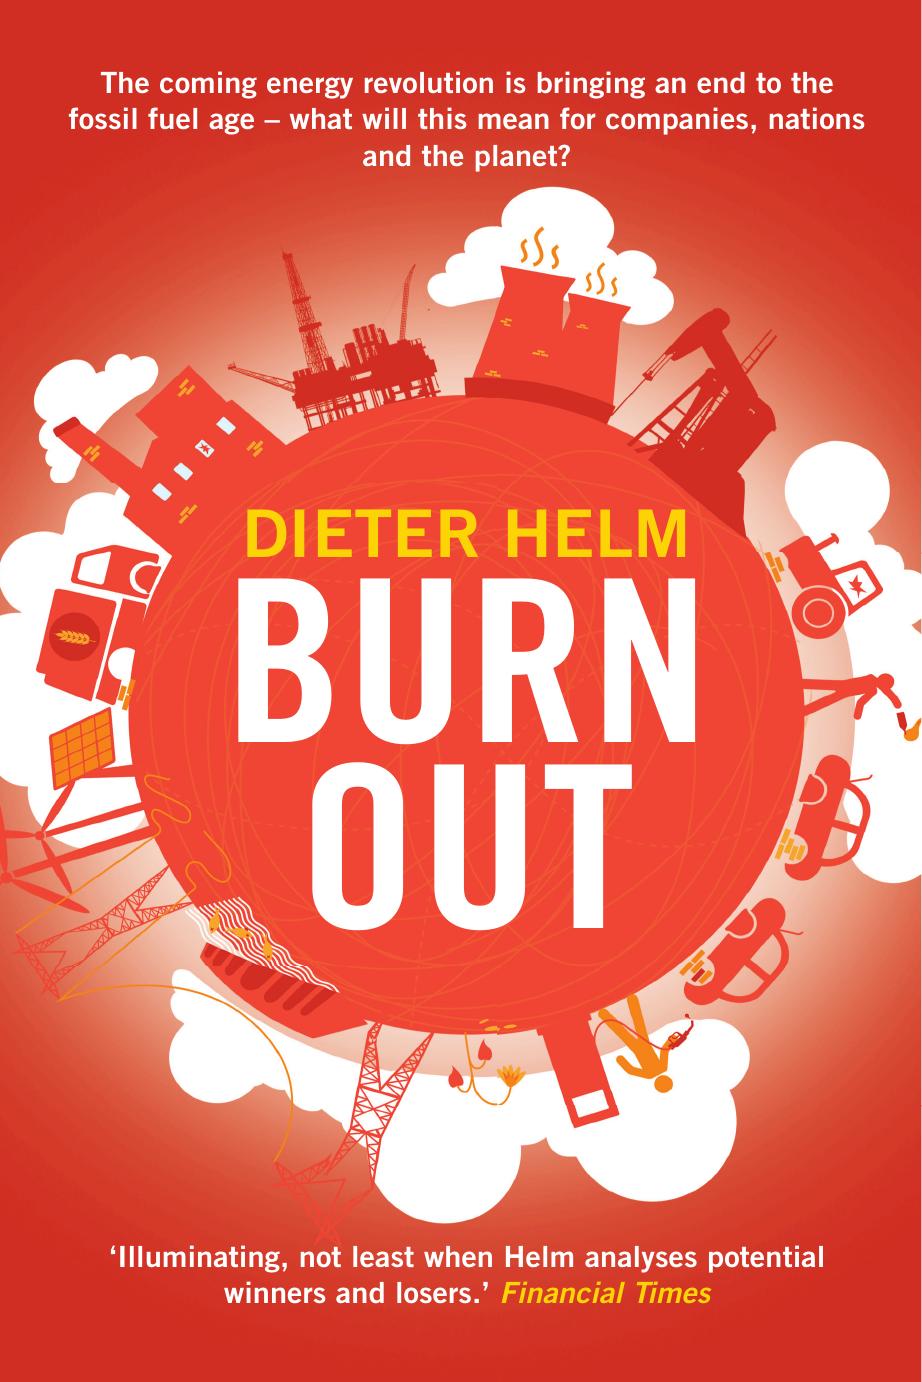 Burn Out: The Endgame for Fossil Fuels by Dieter Helm